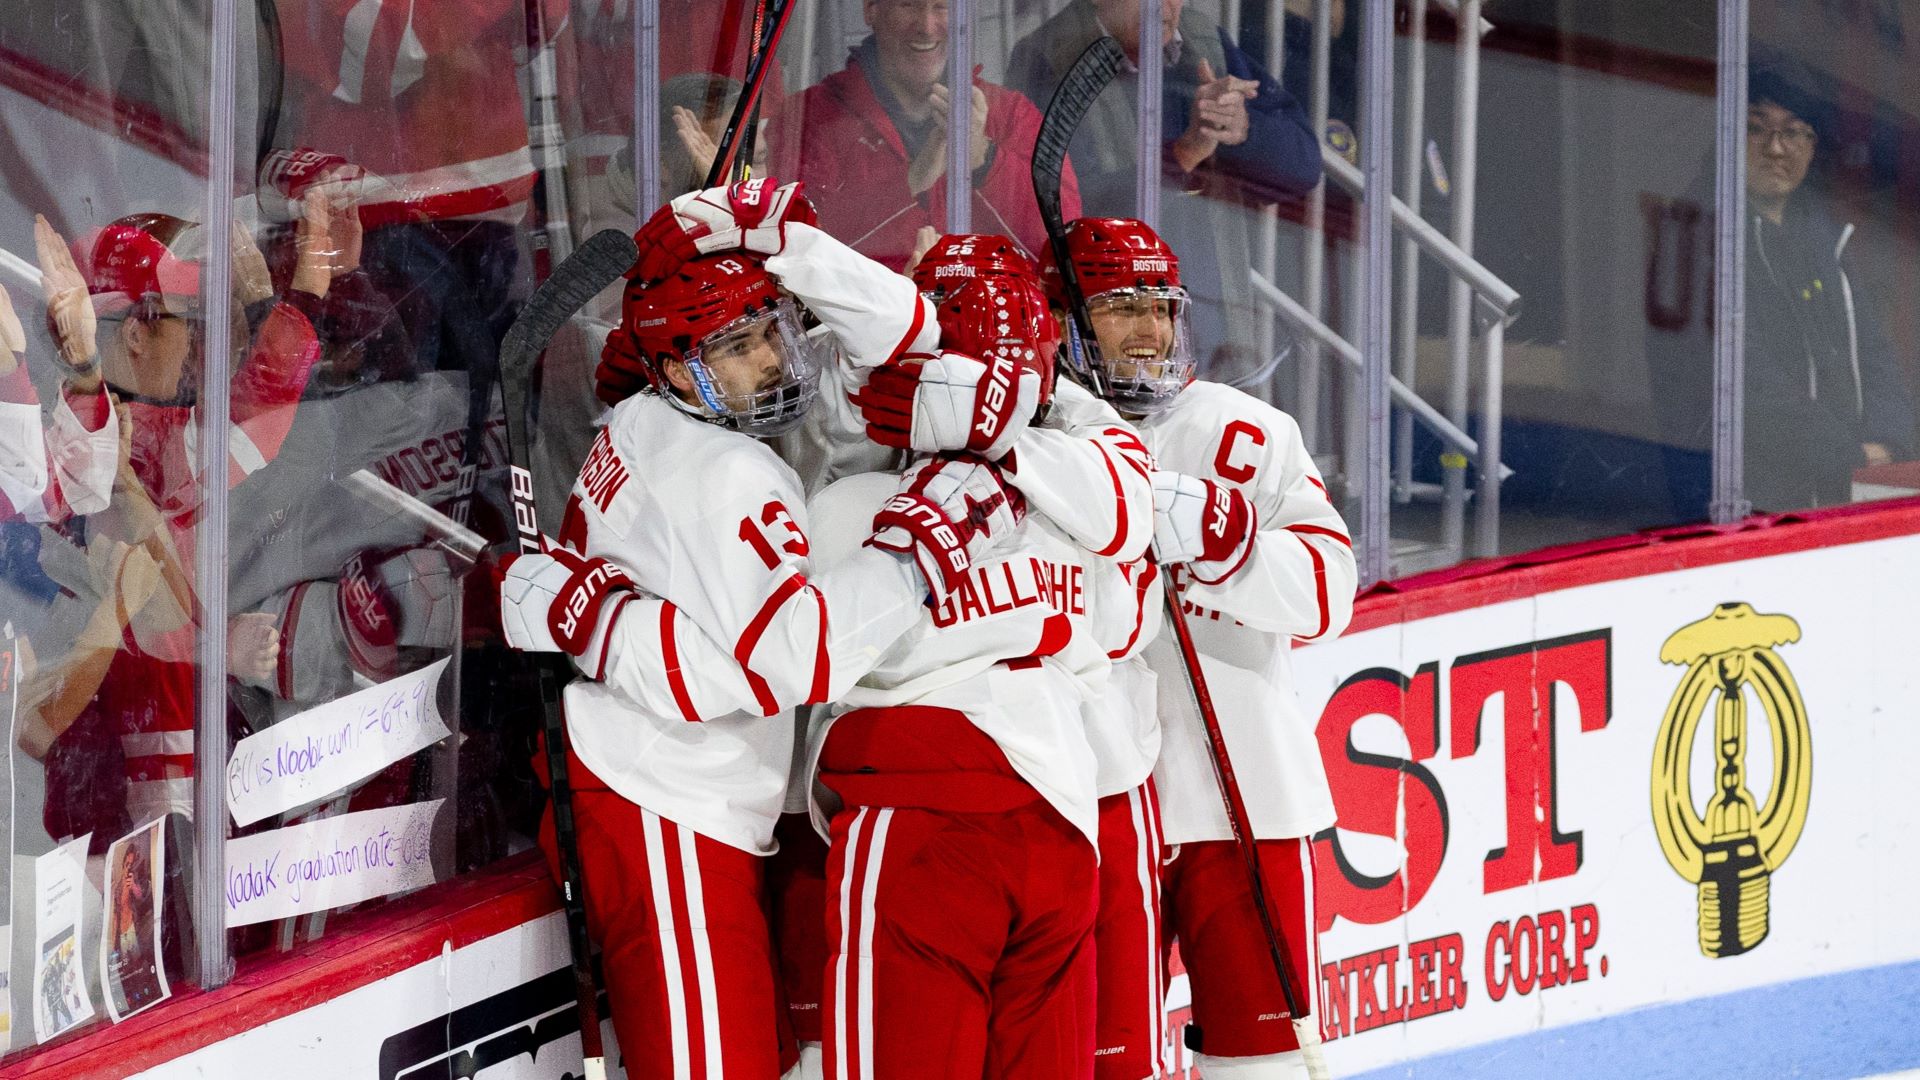 Beanpot Wrap BU Exacts Revenge On TopRanked BC To Get To Final